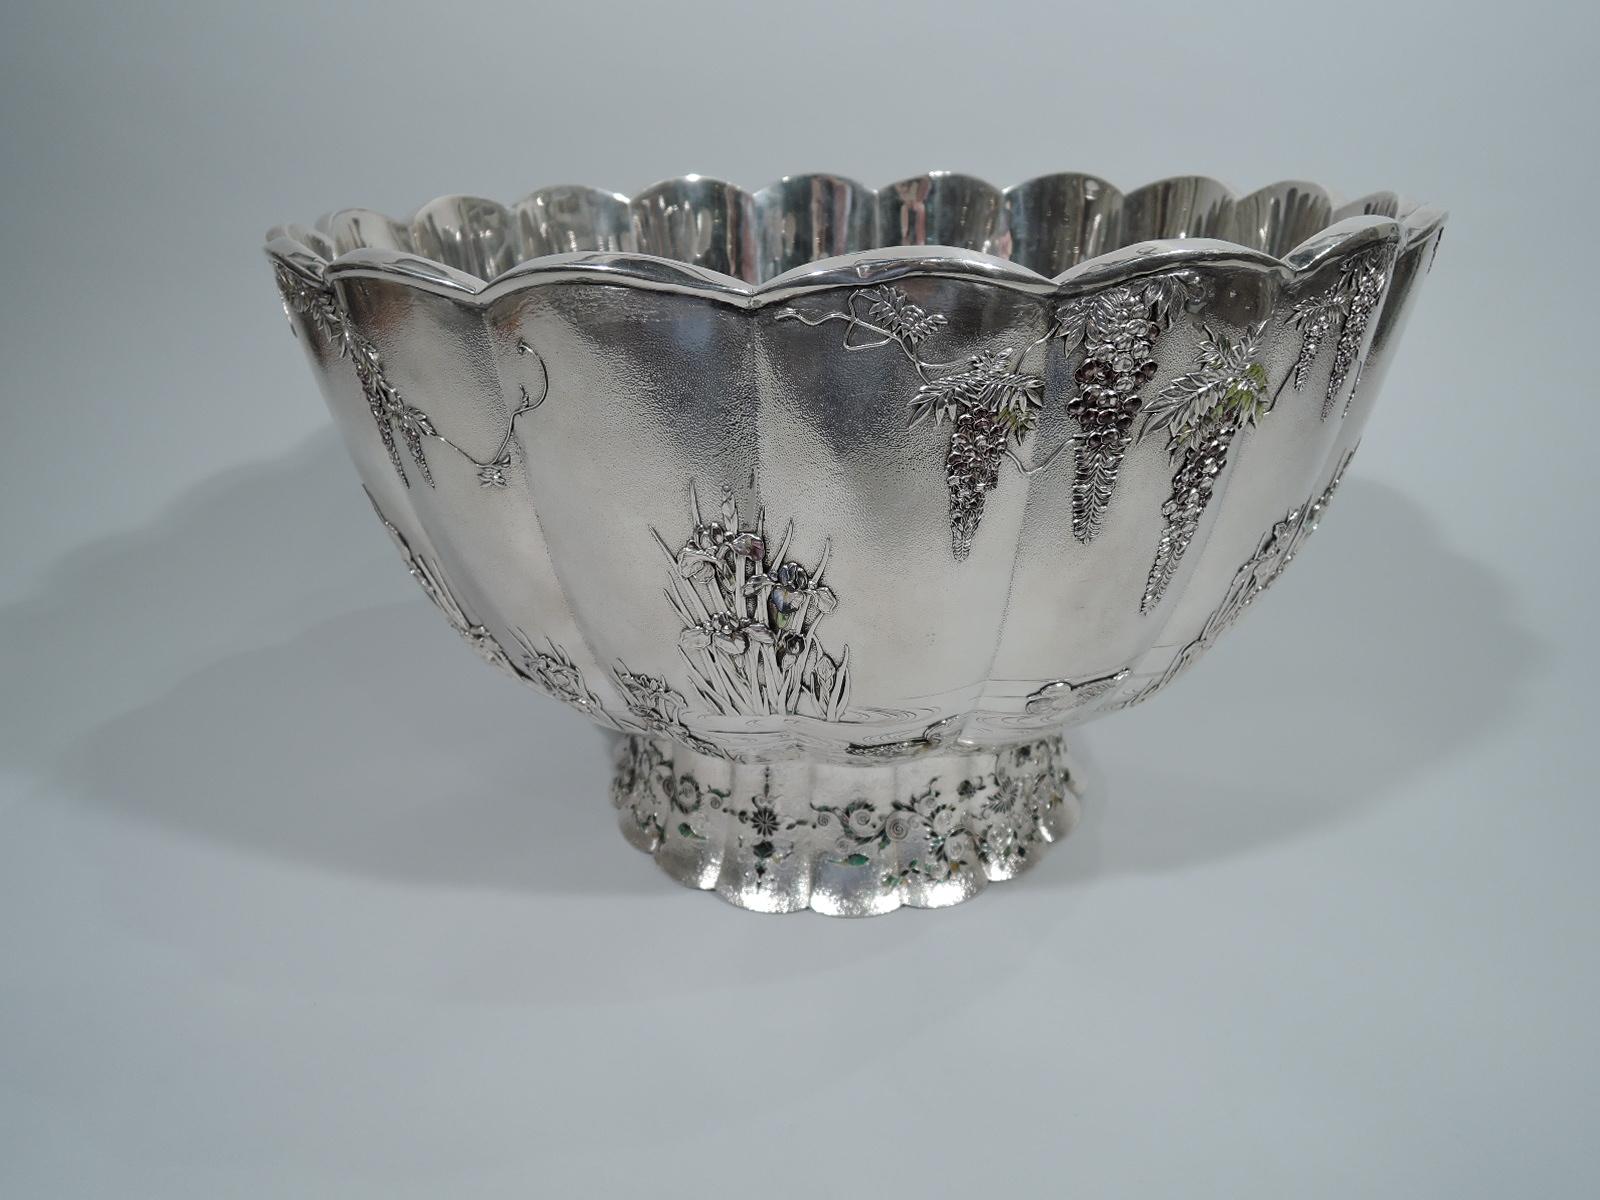 One of the finest pieces we have owned – An antique Japanese silver and enamel centerpiece bowl with world’s fair provenance. Made by Miyanoti Katsu in Tokyo, circa 1904. Curved sides with interior fluting and scalloped rim. Foot has same. Sides